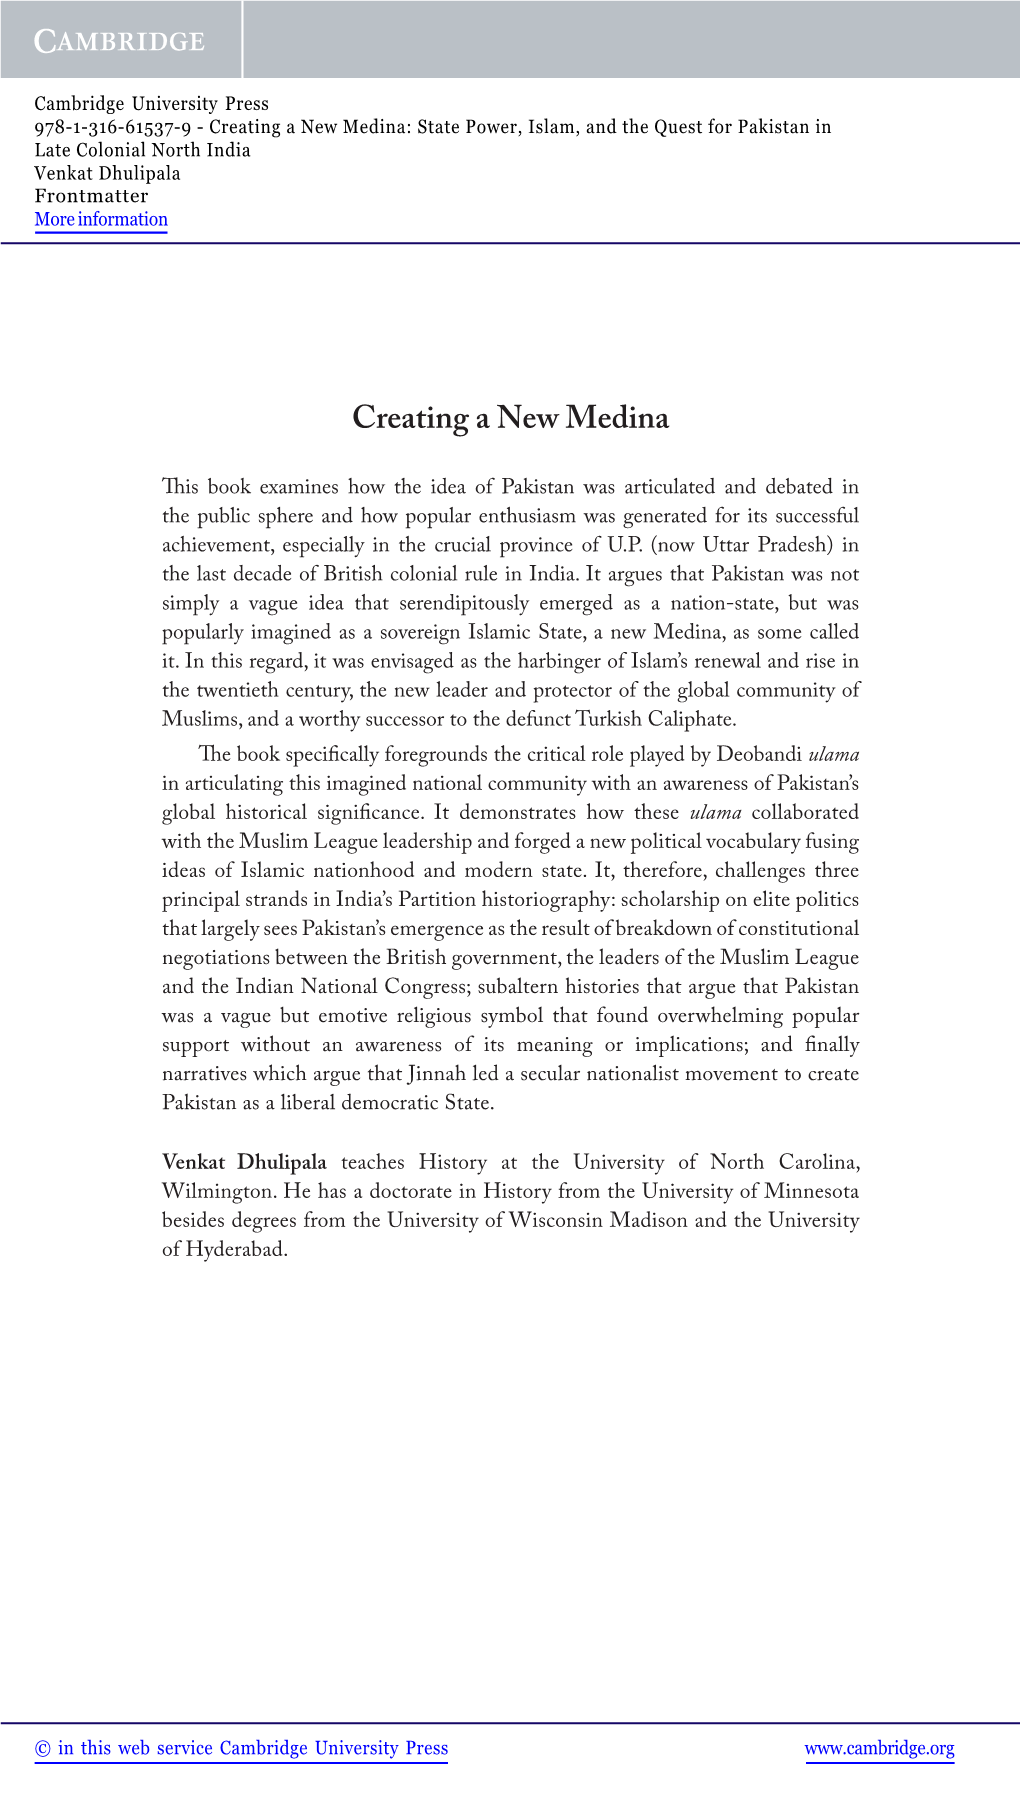 Creating a New Medina: State Power, Islam, and the Quest for Pakistan in Late Colonial North India Venkat Dhulipala Frontmatter More Information